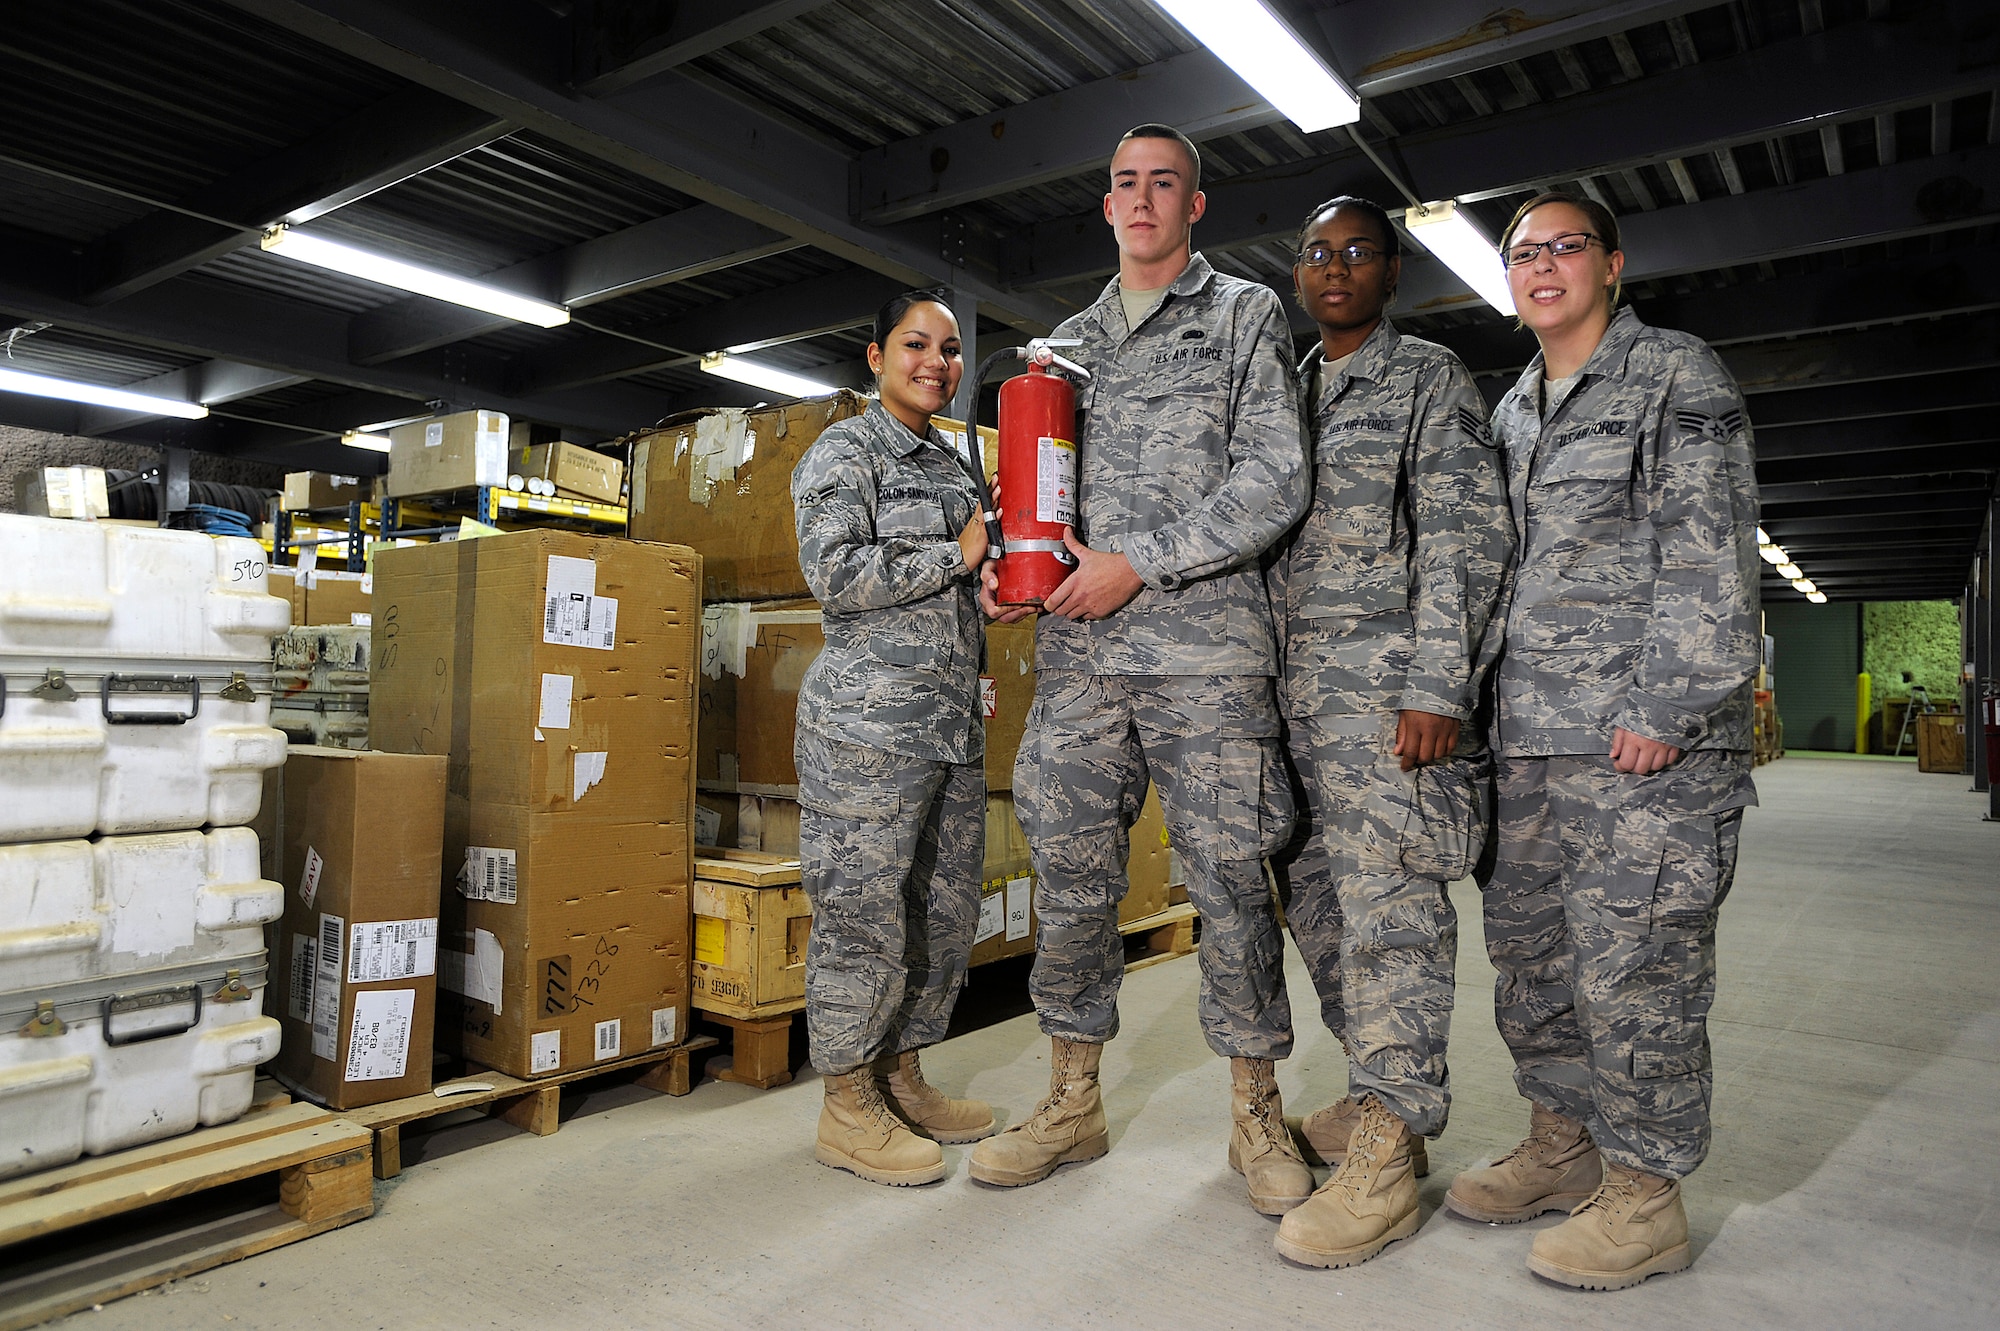 Airman 1st Class Mayra Colon-Santiago, Airman 1st Class Martin Renzi, Staff Sgt. Akeilee Murchison and Senior Airman Heather Libiszewski pose with the fire extinguisher they used to put out a fire in the Joint Base Balad, Iraq, Aircraft Supply Store Sept. 22. Their quick response in extinguishing the fire saved millions of dollars in Air Force assets. All Airmen are supply technicians assigned to the 332nd Expeditionary Logistics Readiness Squadron. Colon-Santiago is deployed from McGuire Air Force Base, N.J., and her hometown is Harvest, Ala. Renzi is deployed from McGuire AFB and his hometown is Gloucester, N.J. Murchison is deployed from Westover Air Reserve Base, Mass., and her hometown is Springfield, Mass. Libiszewski is deployed from Westover ARB and her hometown is Warren, Mass. (U.S. Air Force photo/Airman 1st Class Jason Epley)